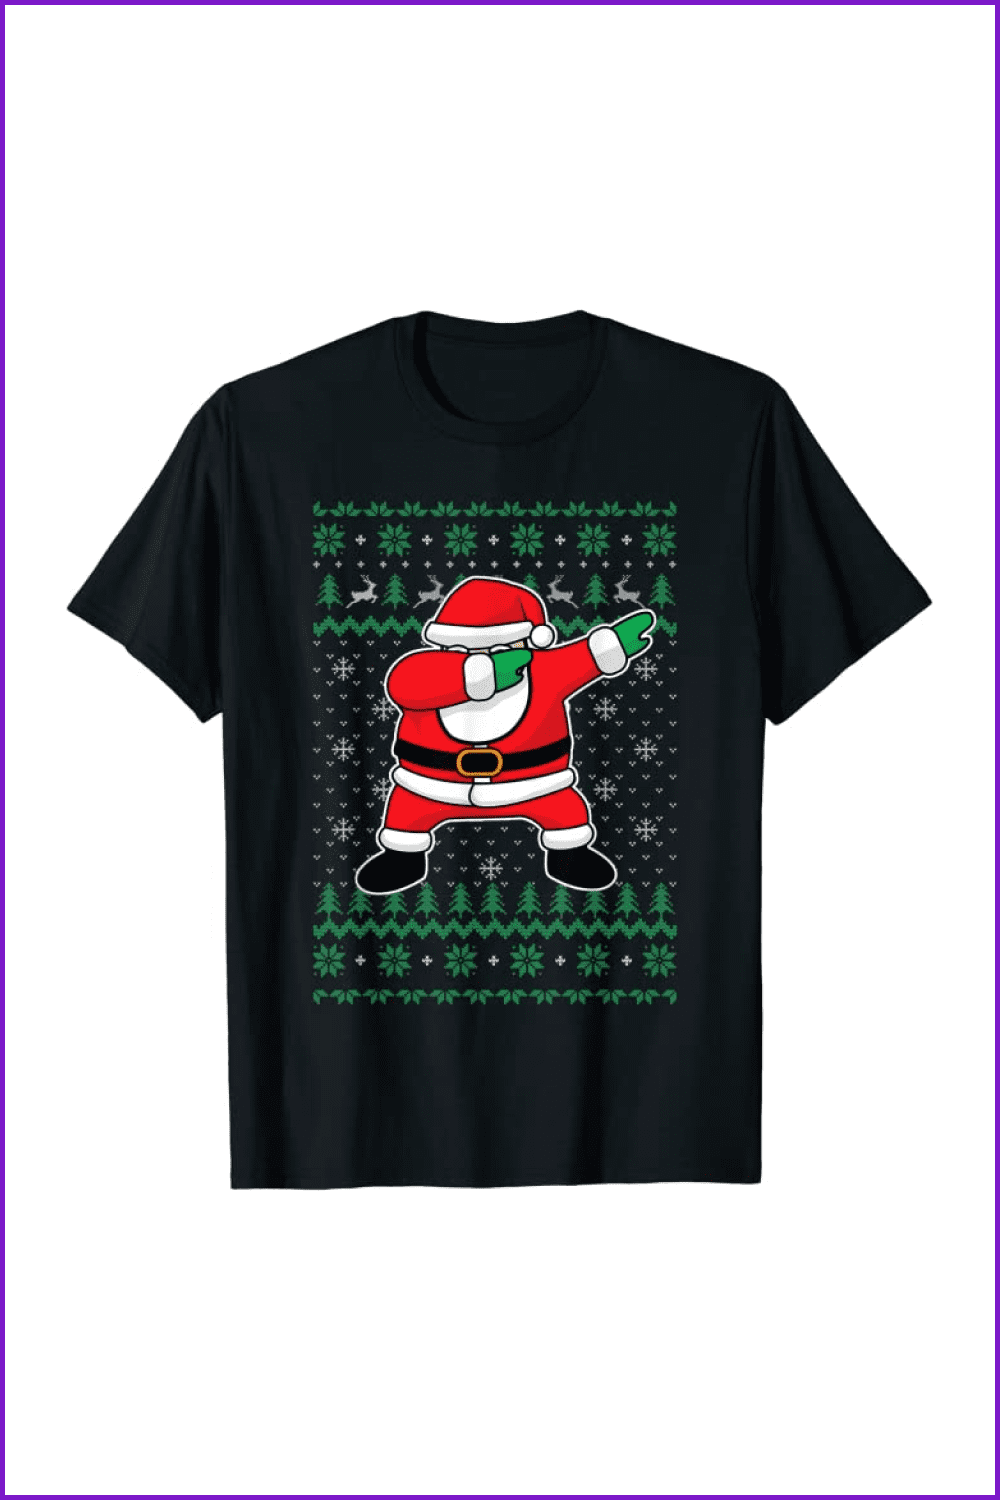 T-shirt with a dabbing Santa Claus on the black background with a green winter pattern.